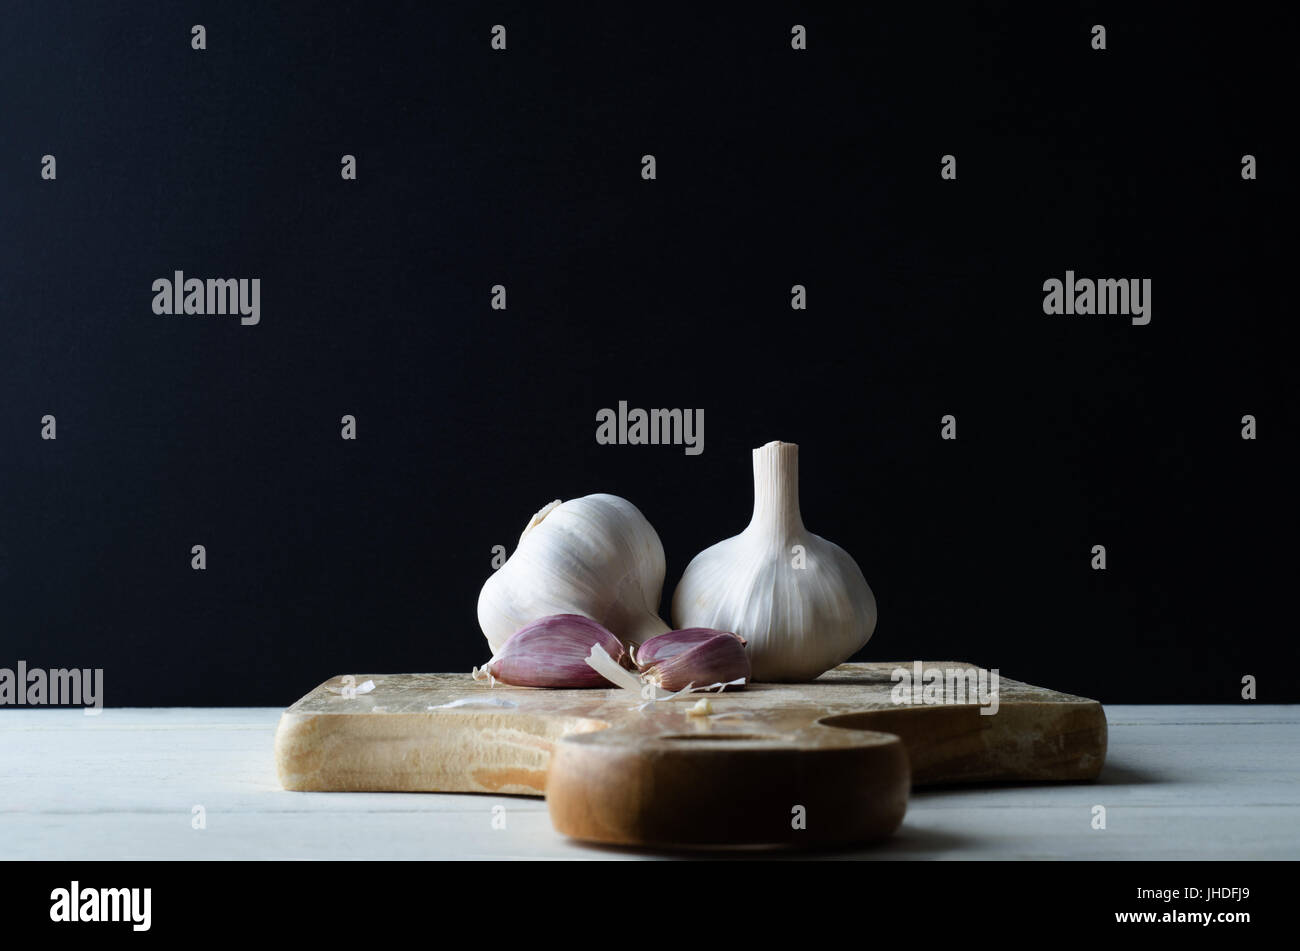 Food preparation still life of two garlic bulbs and cloves with scattered peelings on an old wooden chopping board with white plank kitchen table bene Stock Photo